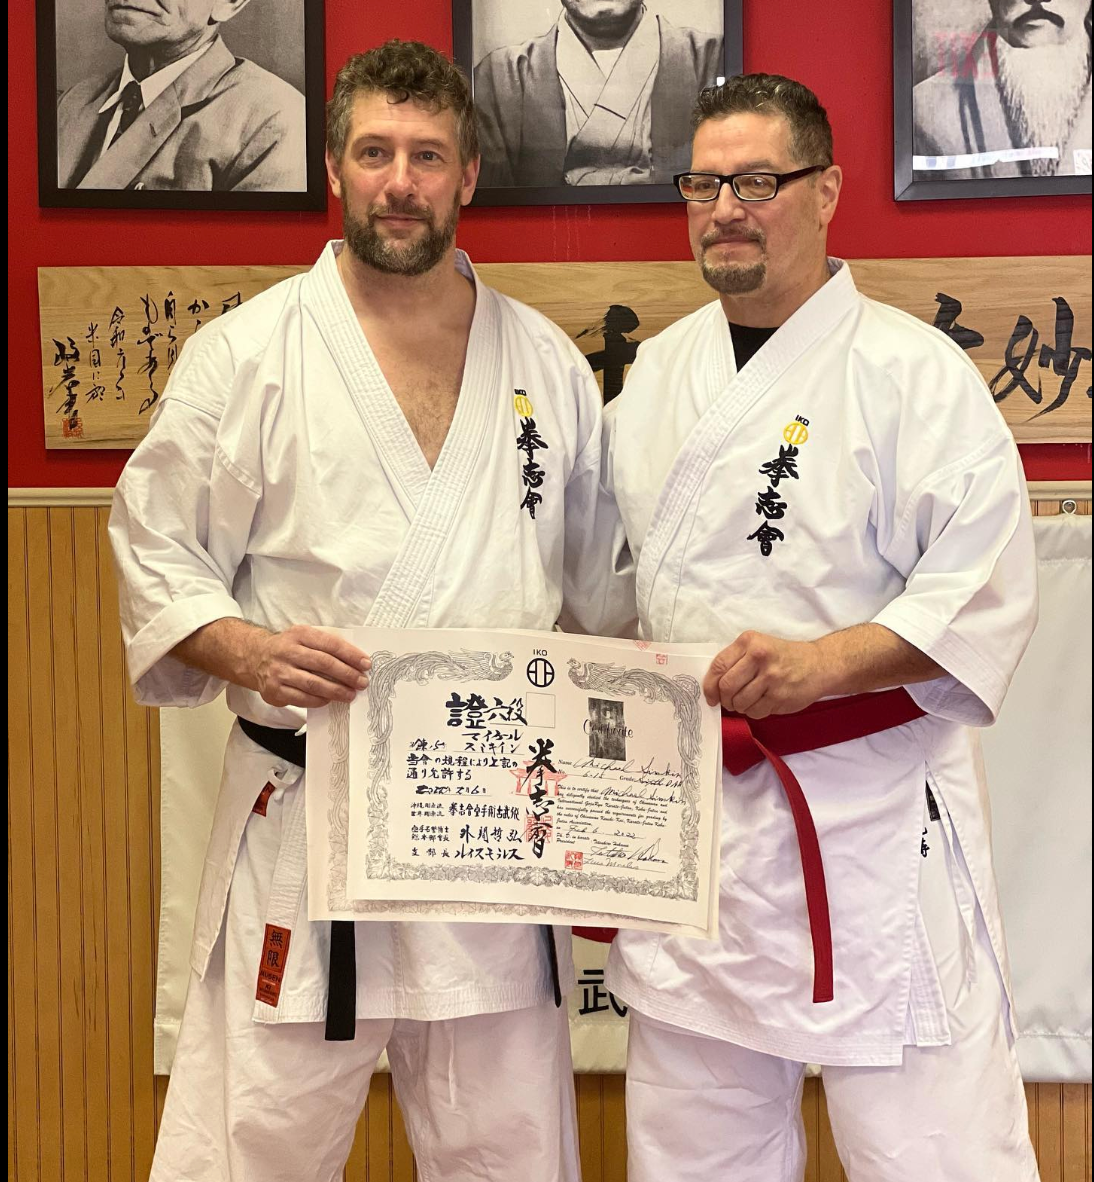 Two men in karate uniforms are holding a certificate